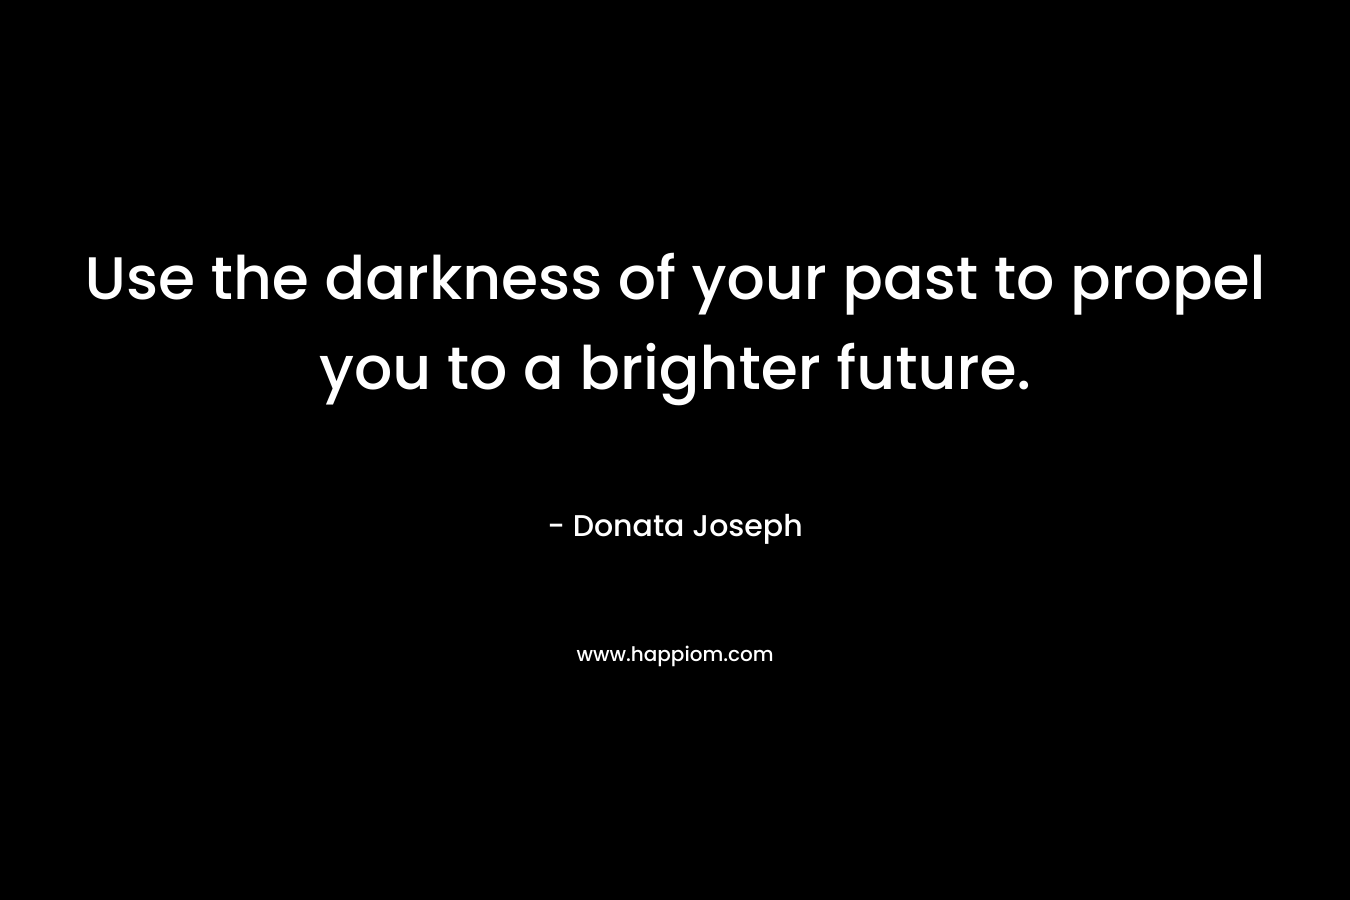 Use the darkness of your past to propel you to a brighter future.